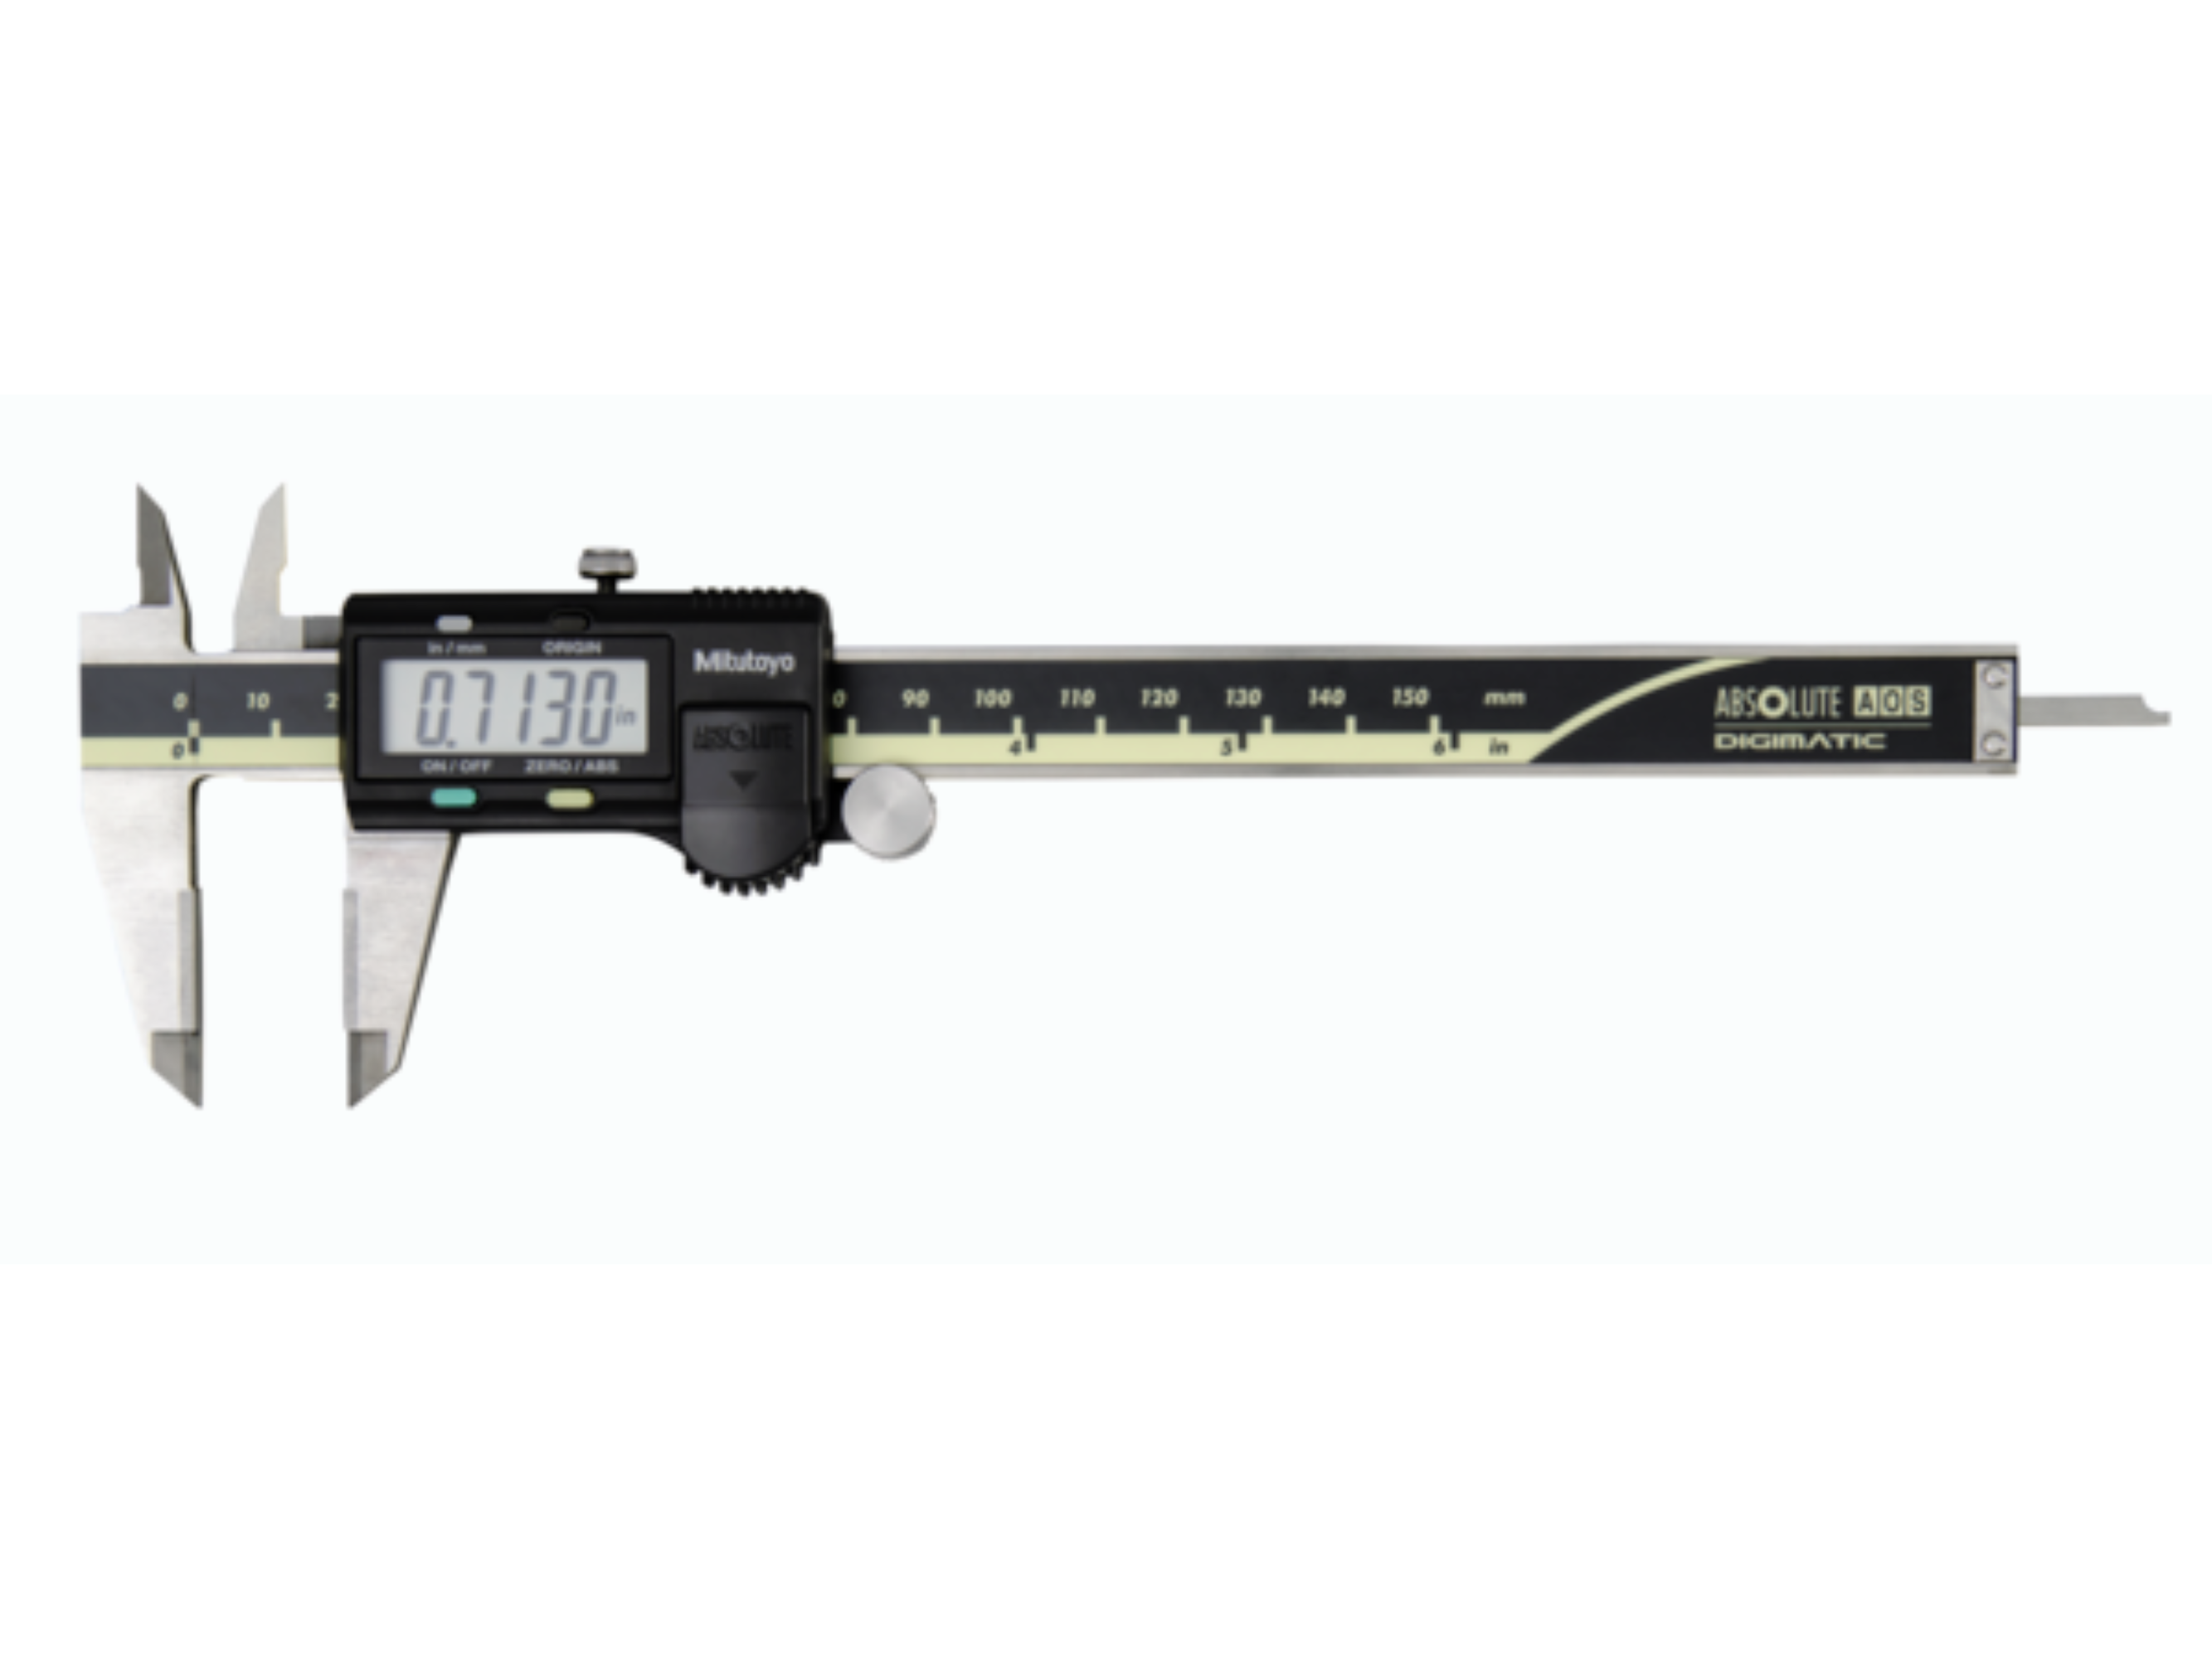 Digital ABSOLUTE AOS Calipers 0-300mm (0-12") With Output Carbide OD/ID Jaws 500-168-30